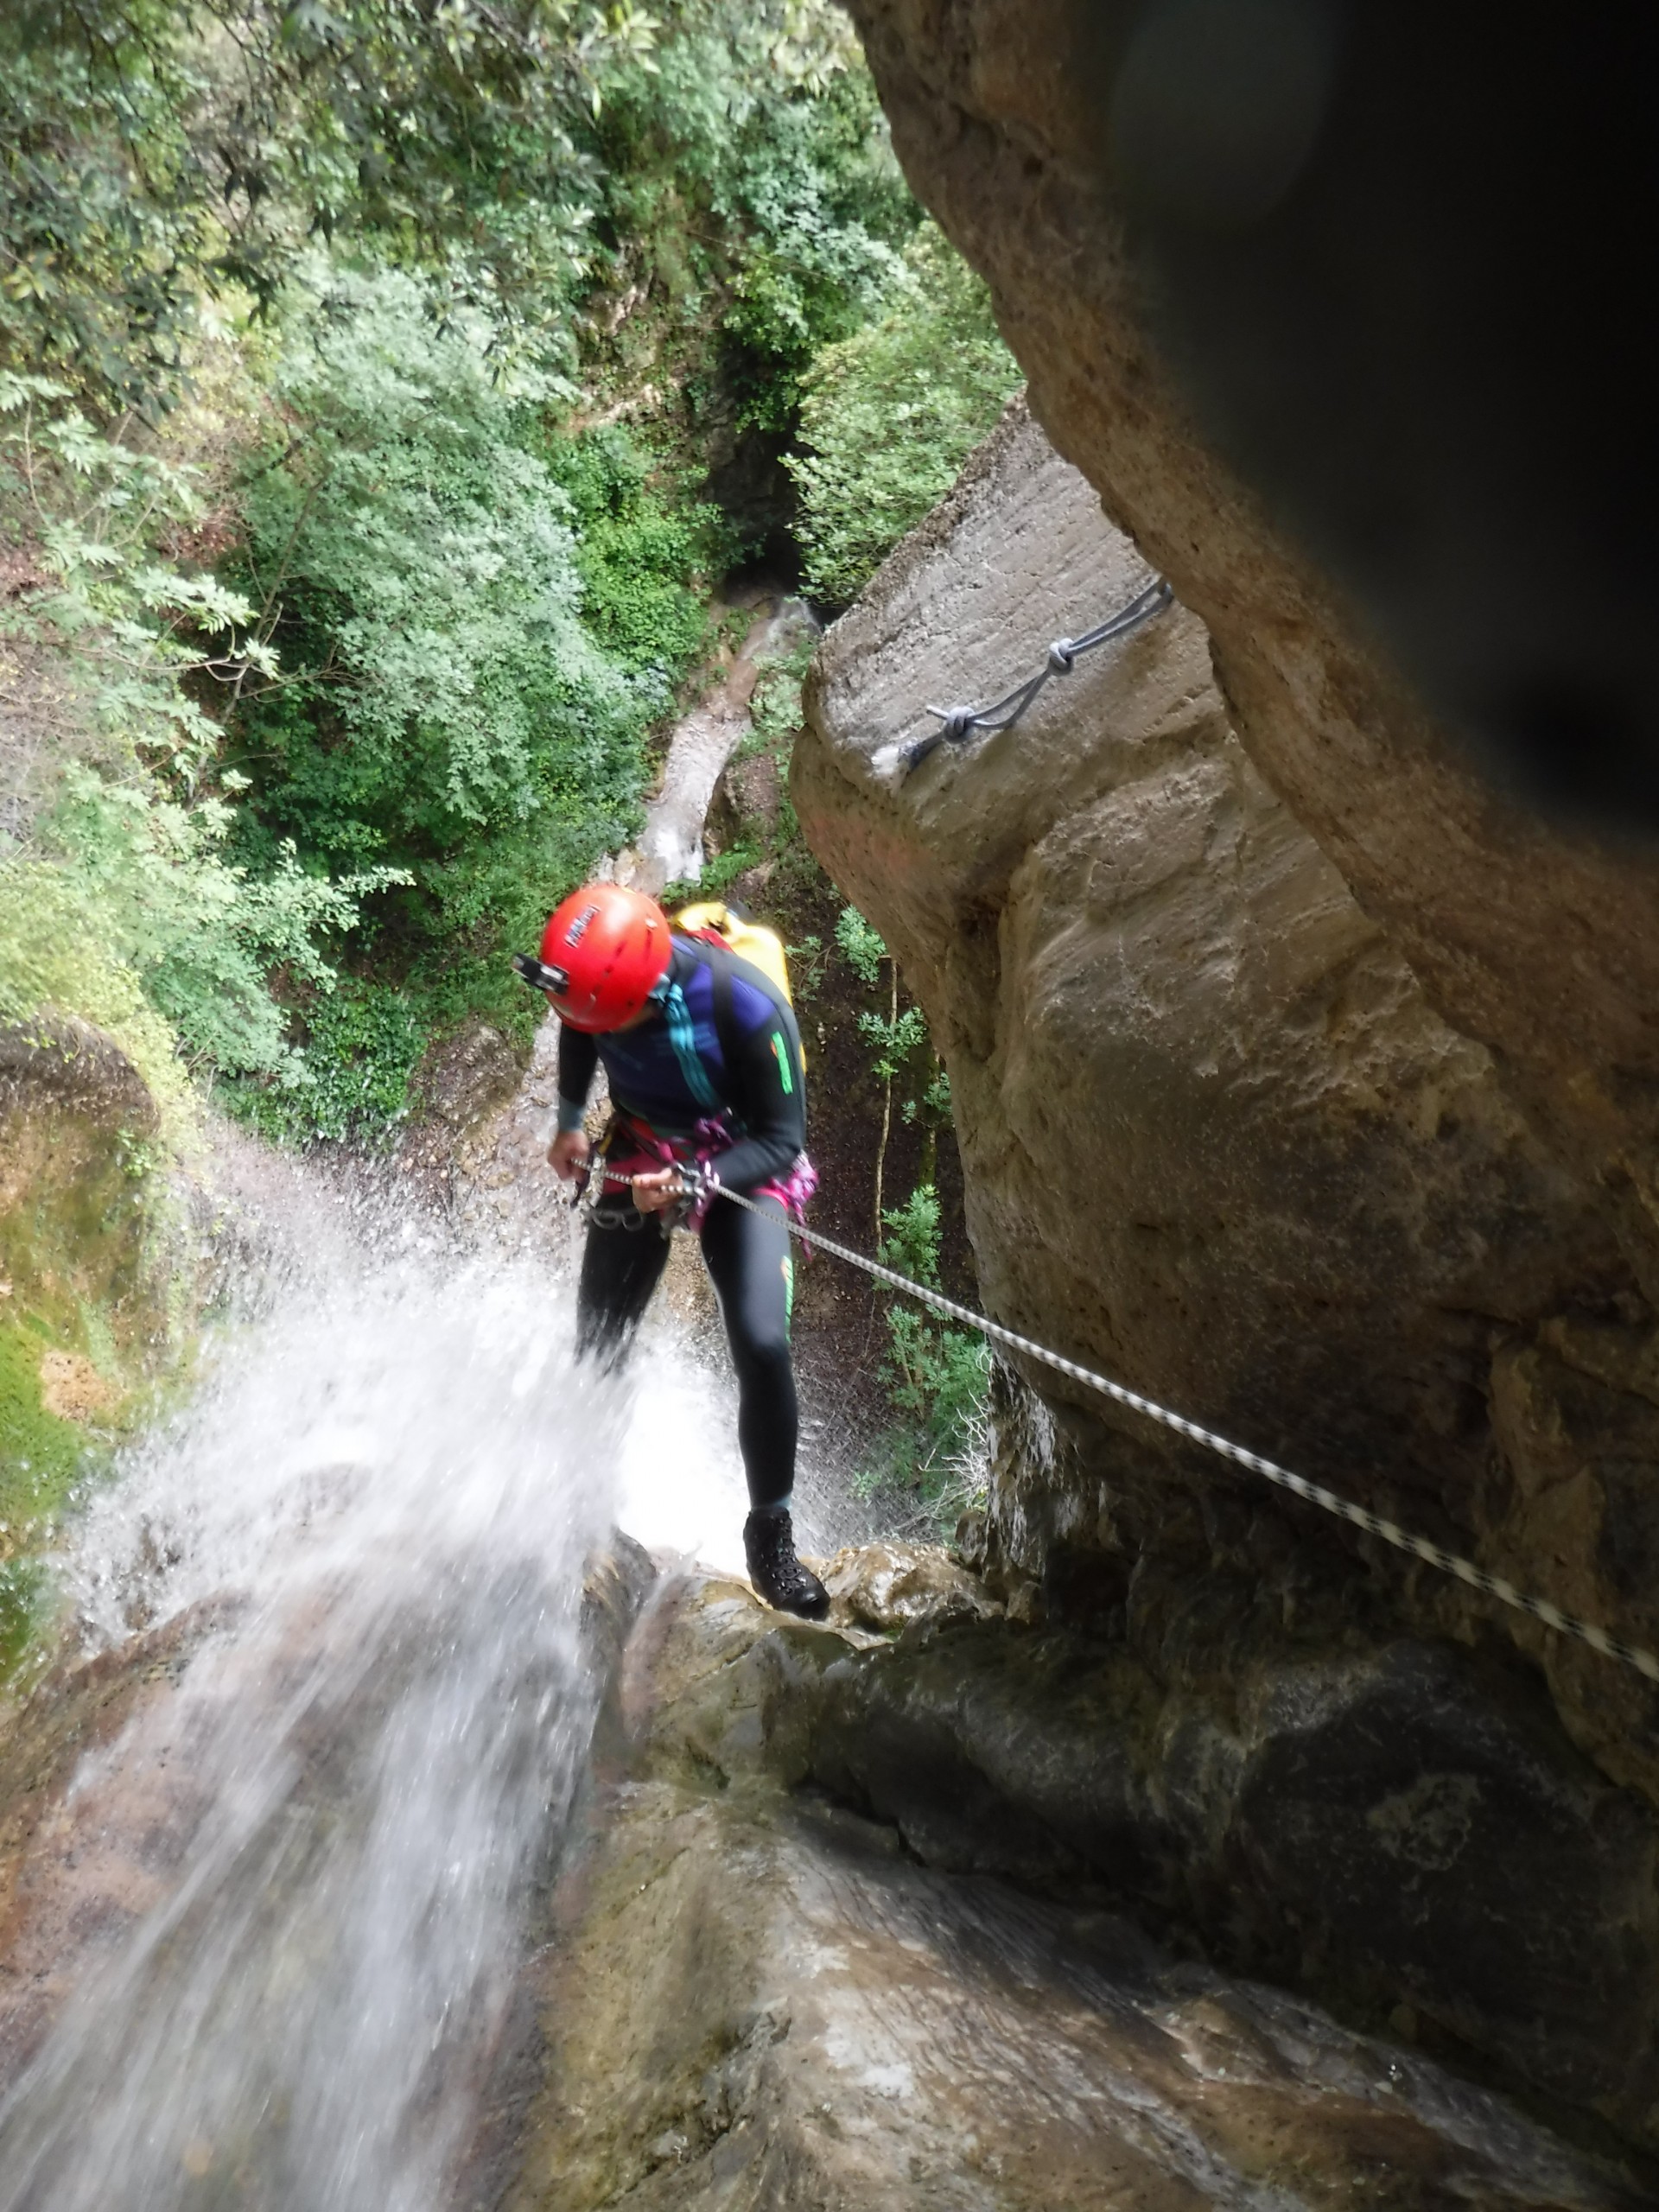 Dove praticare canyoning in Umbria